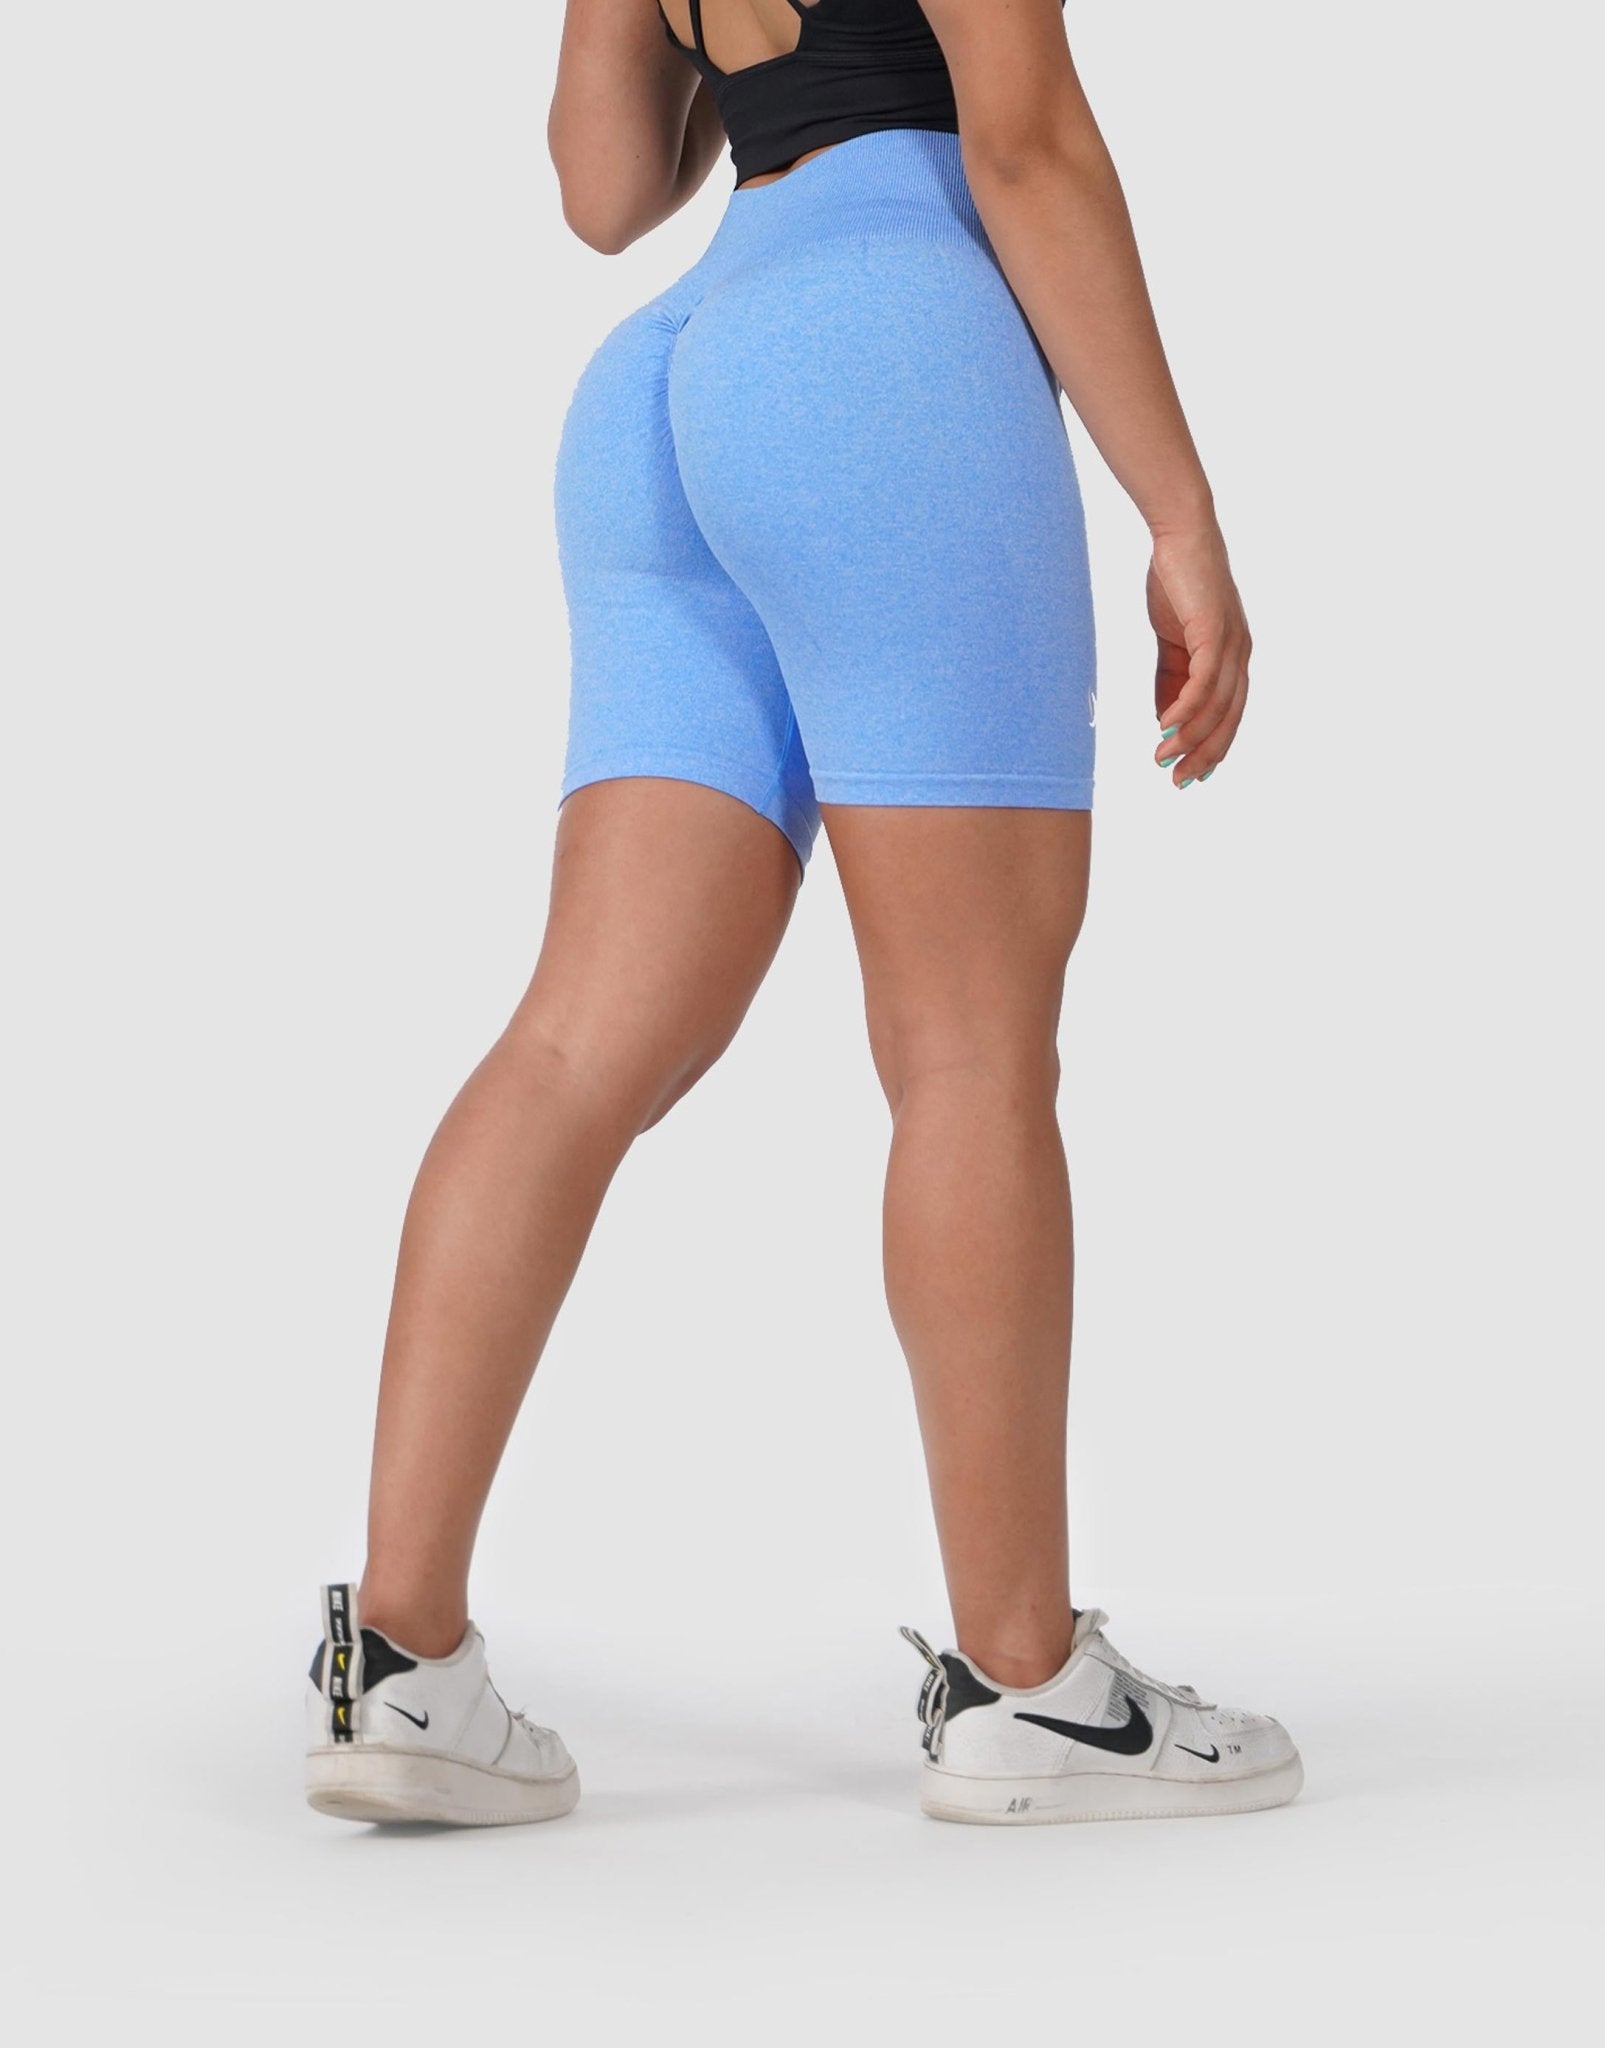 NEW Bombshell Sportswear Form Bodysuit Shorts Review: Try On Haul, Fit and  Size Guide Honest Review 